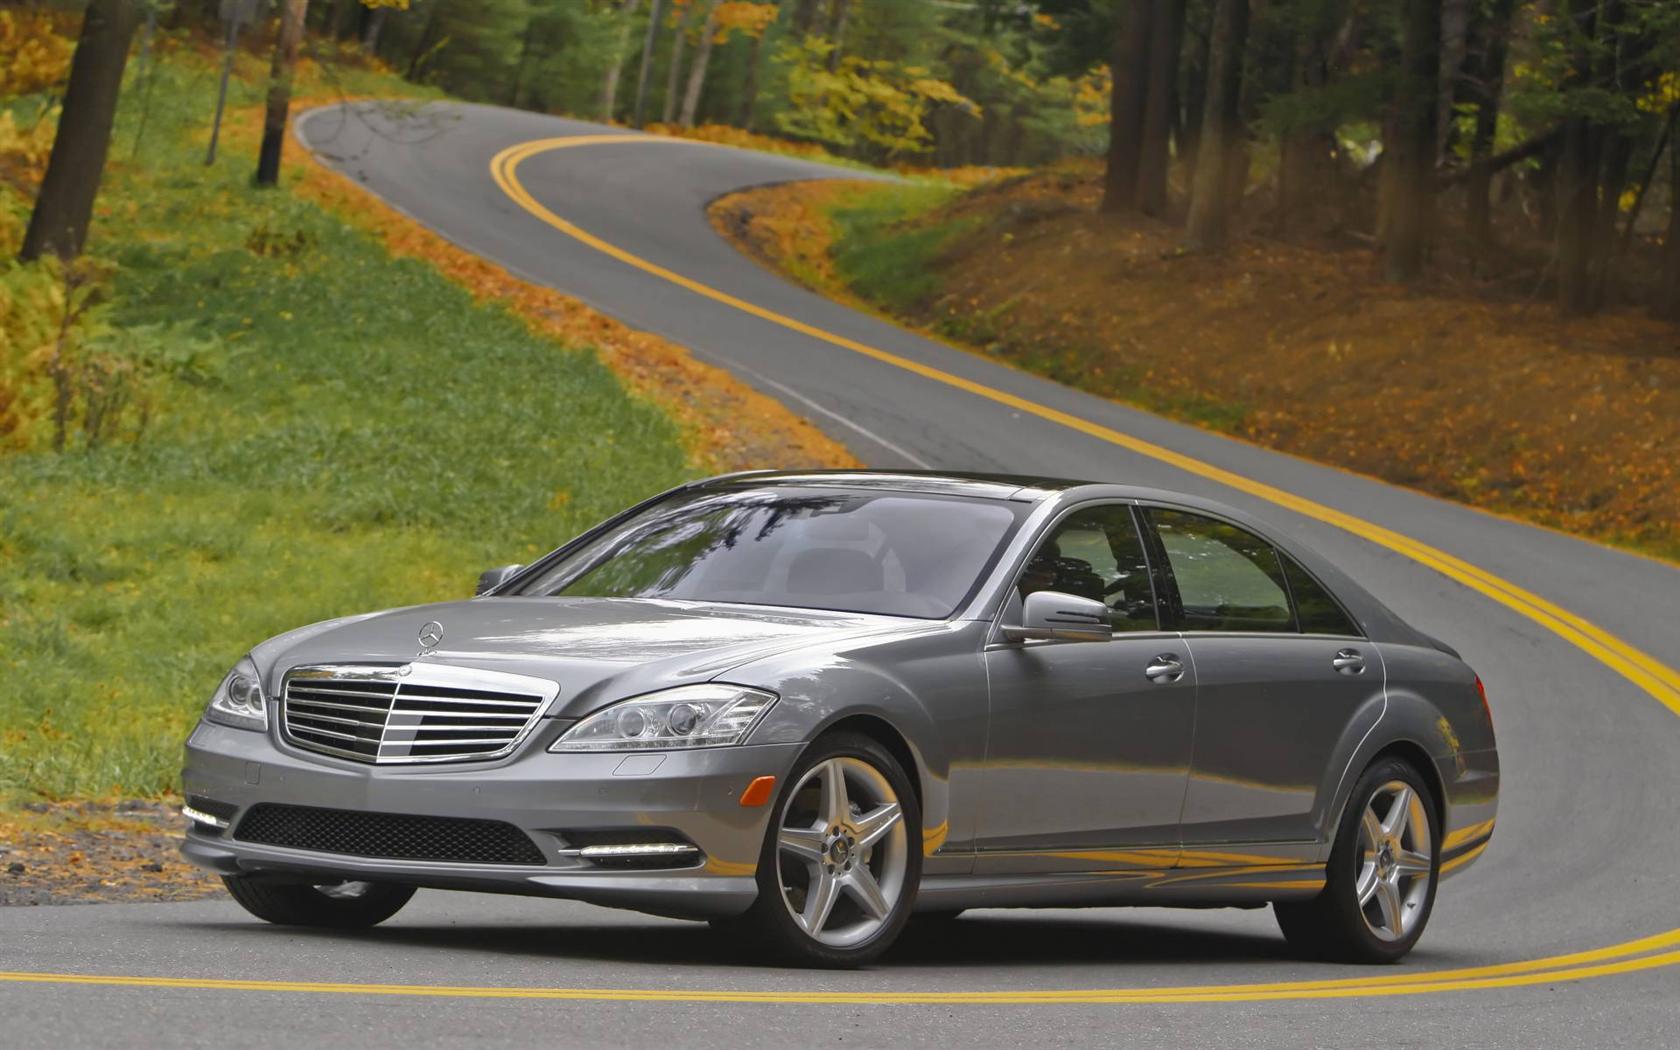 Mercedes-benz S550 2013: Review, Amazing Pictures and Images - Look at ...